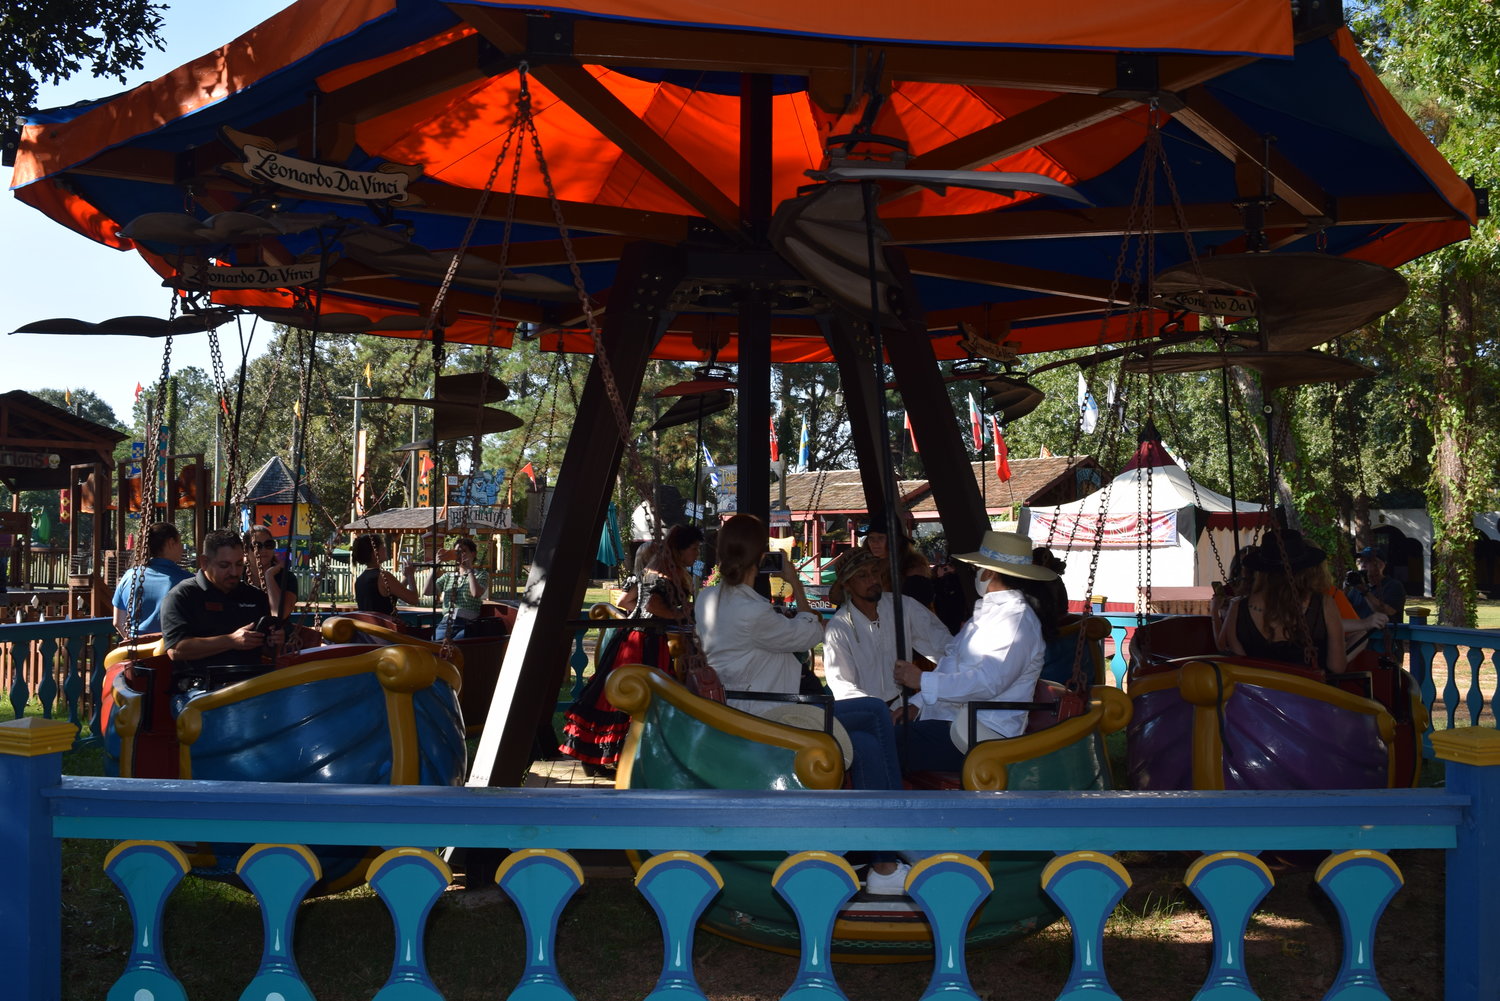 The DaVinci Flying Machines is another new attraction at the Texas Renaissance Festival this year. Like all of the rides at the carnival, DaVinci is fully manually operated and riders have the opportunity to help make the ride more festive.